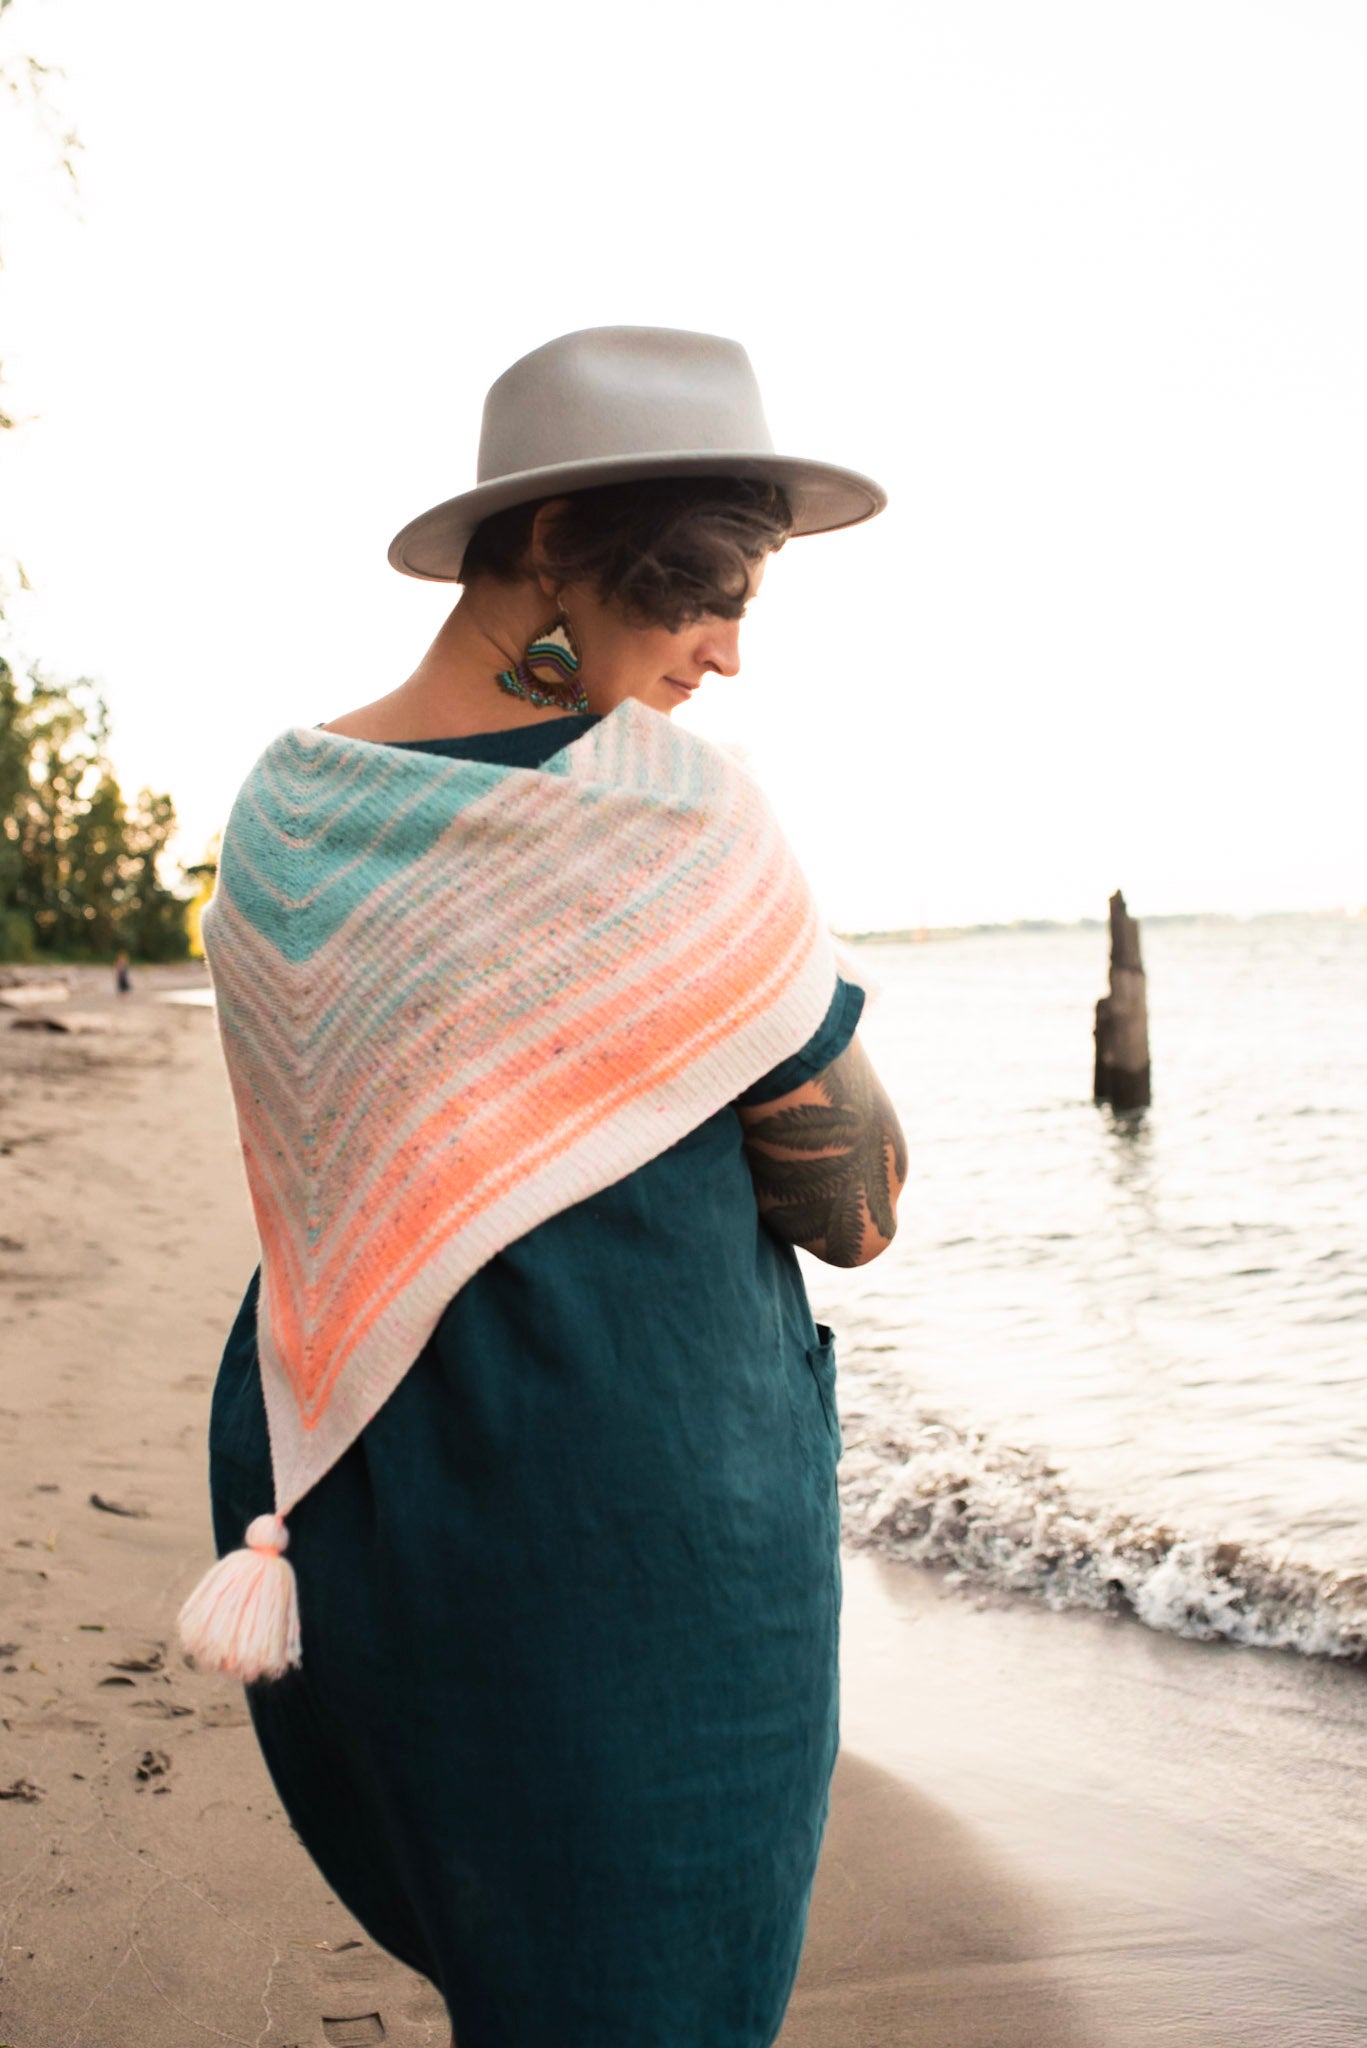 Seen from behind, Jen wears a pastel striped shawl, draped over her shoulders. The shawl has tassels at each point of the triangle shape. A beach and some trees can be seen in the background.